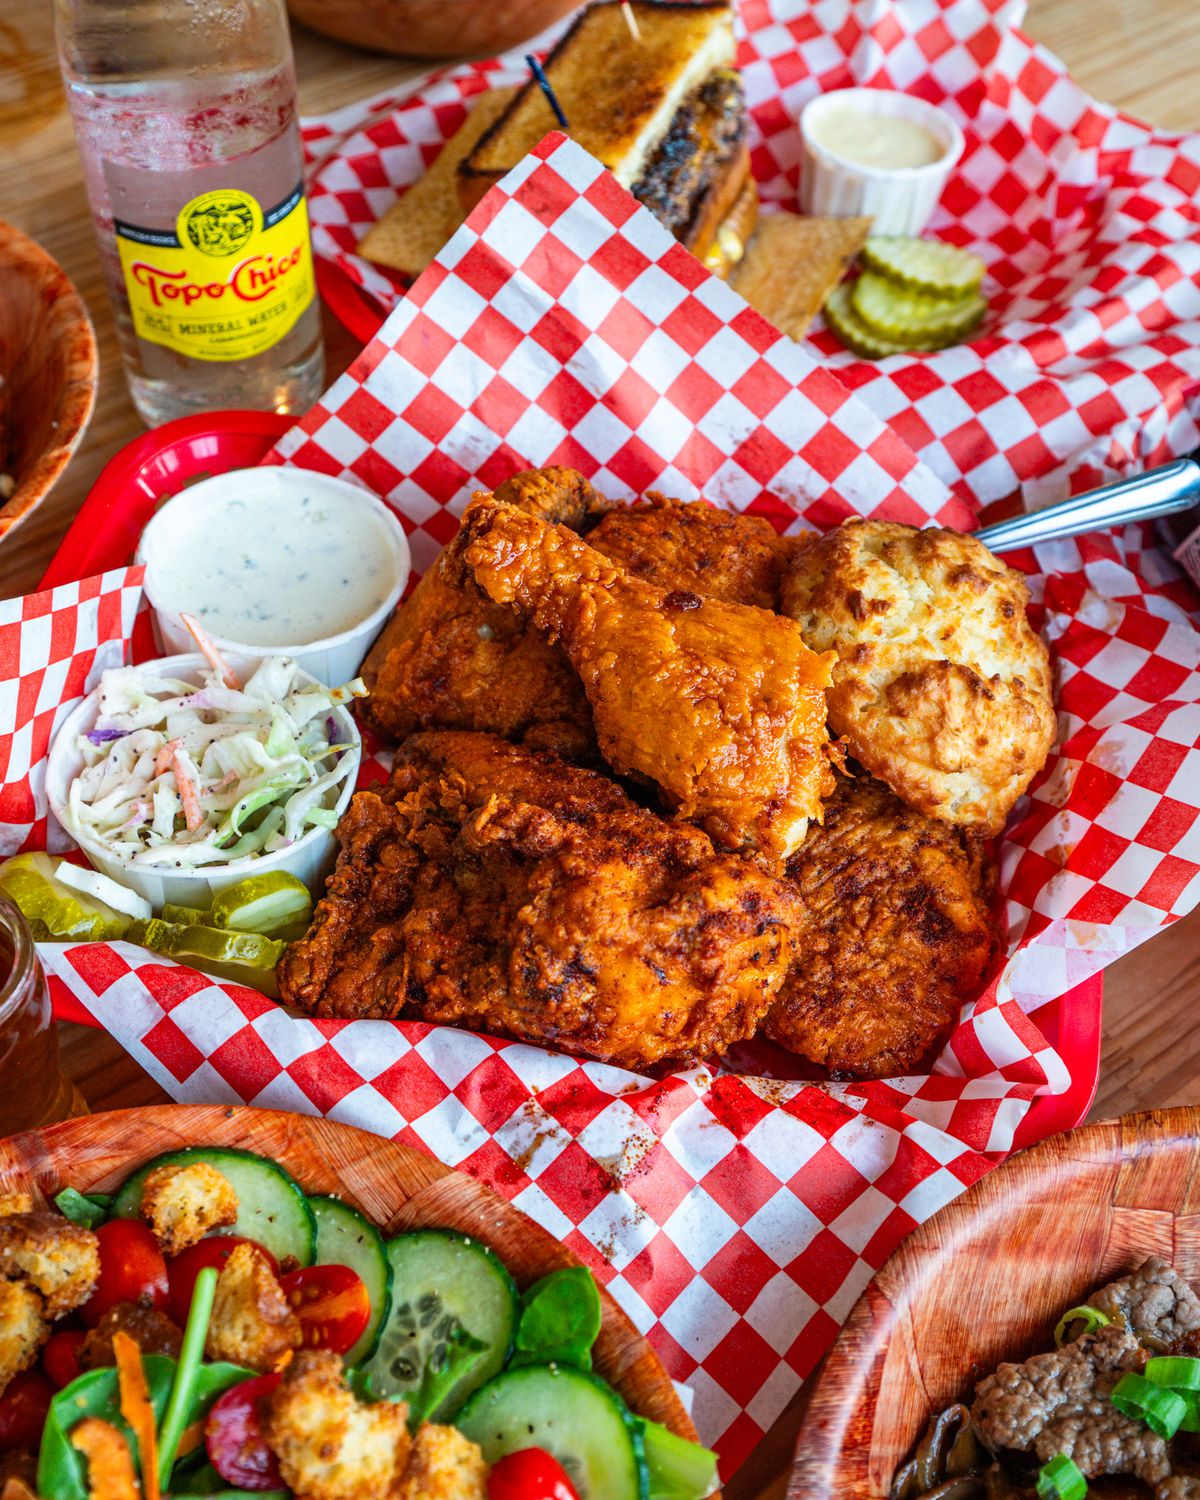 Fried chicken and sides in trays lined with red-and-white-squared wax paper.